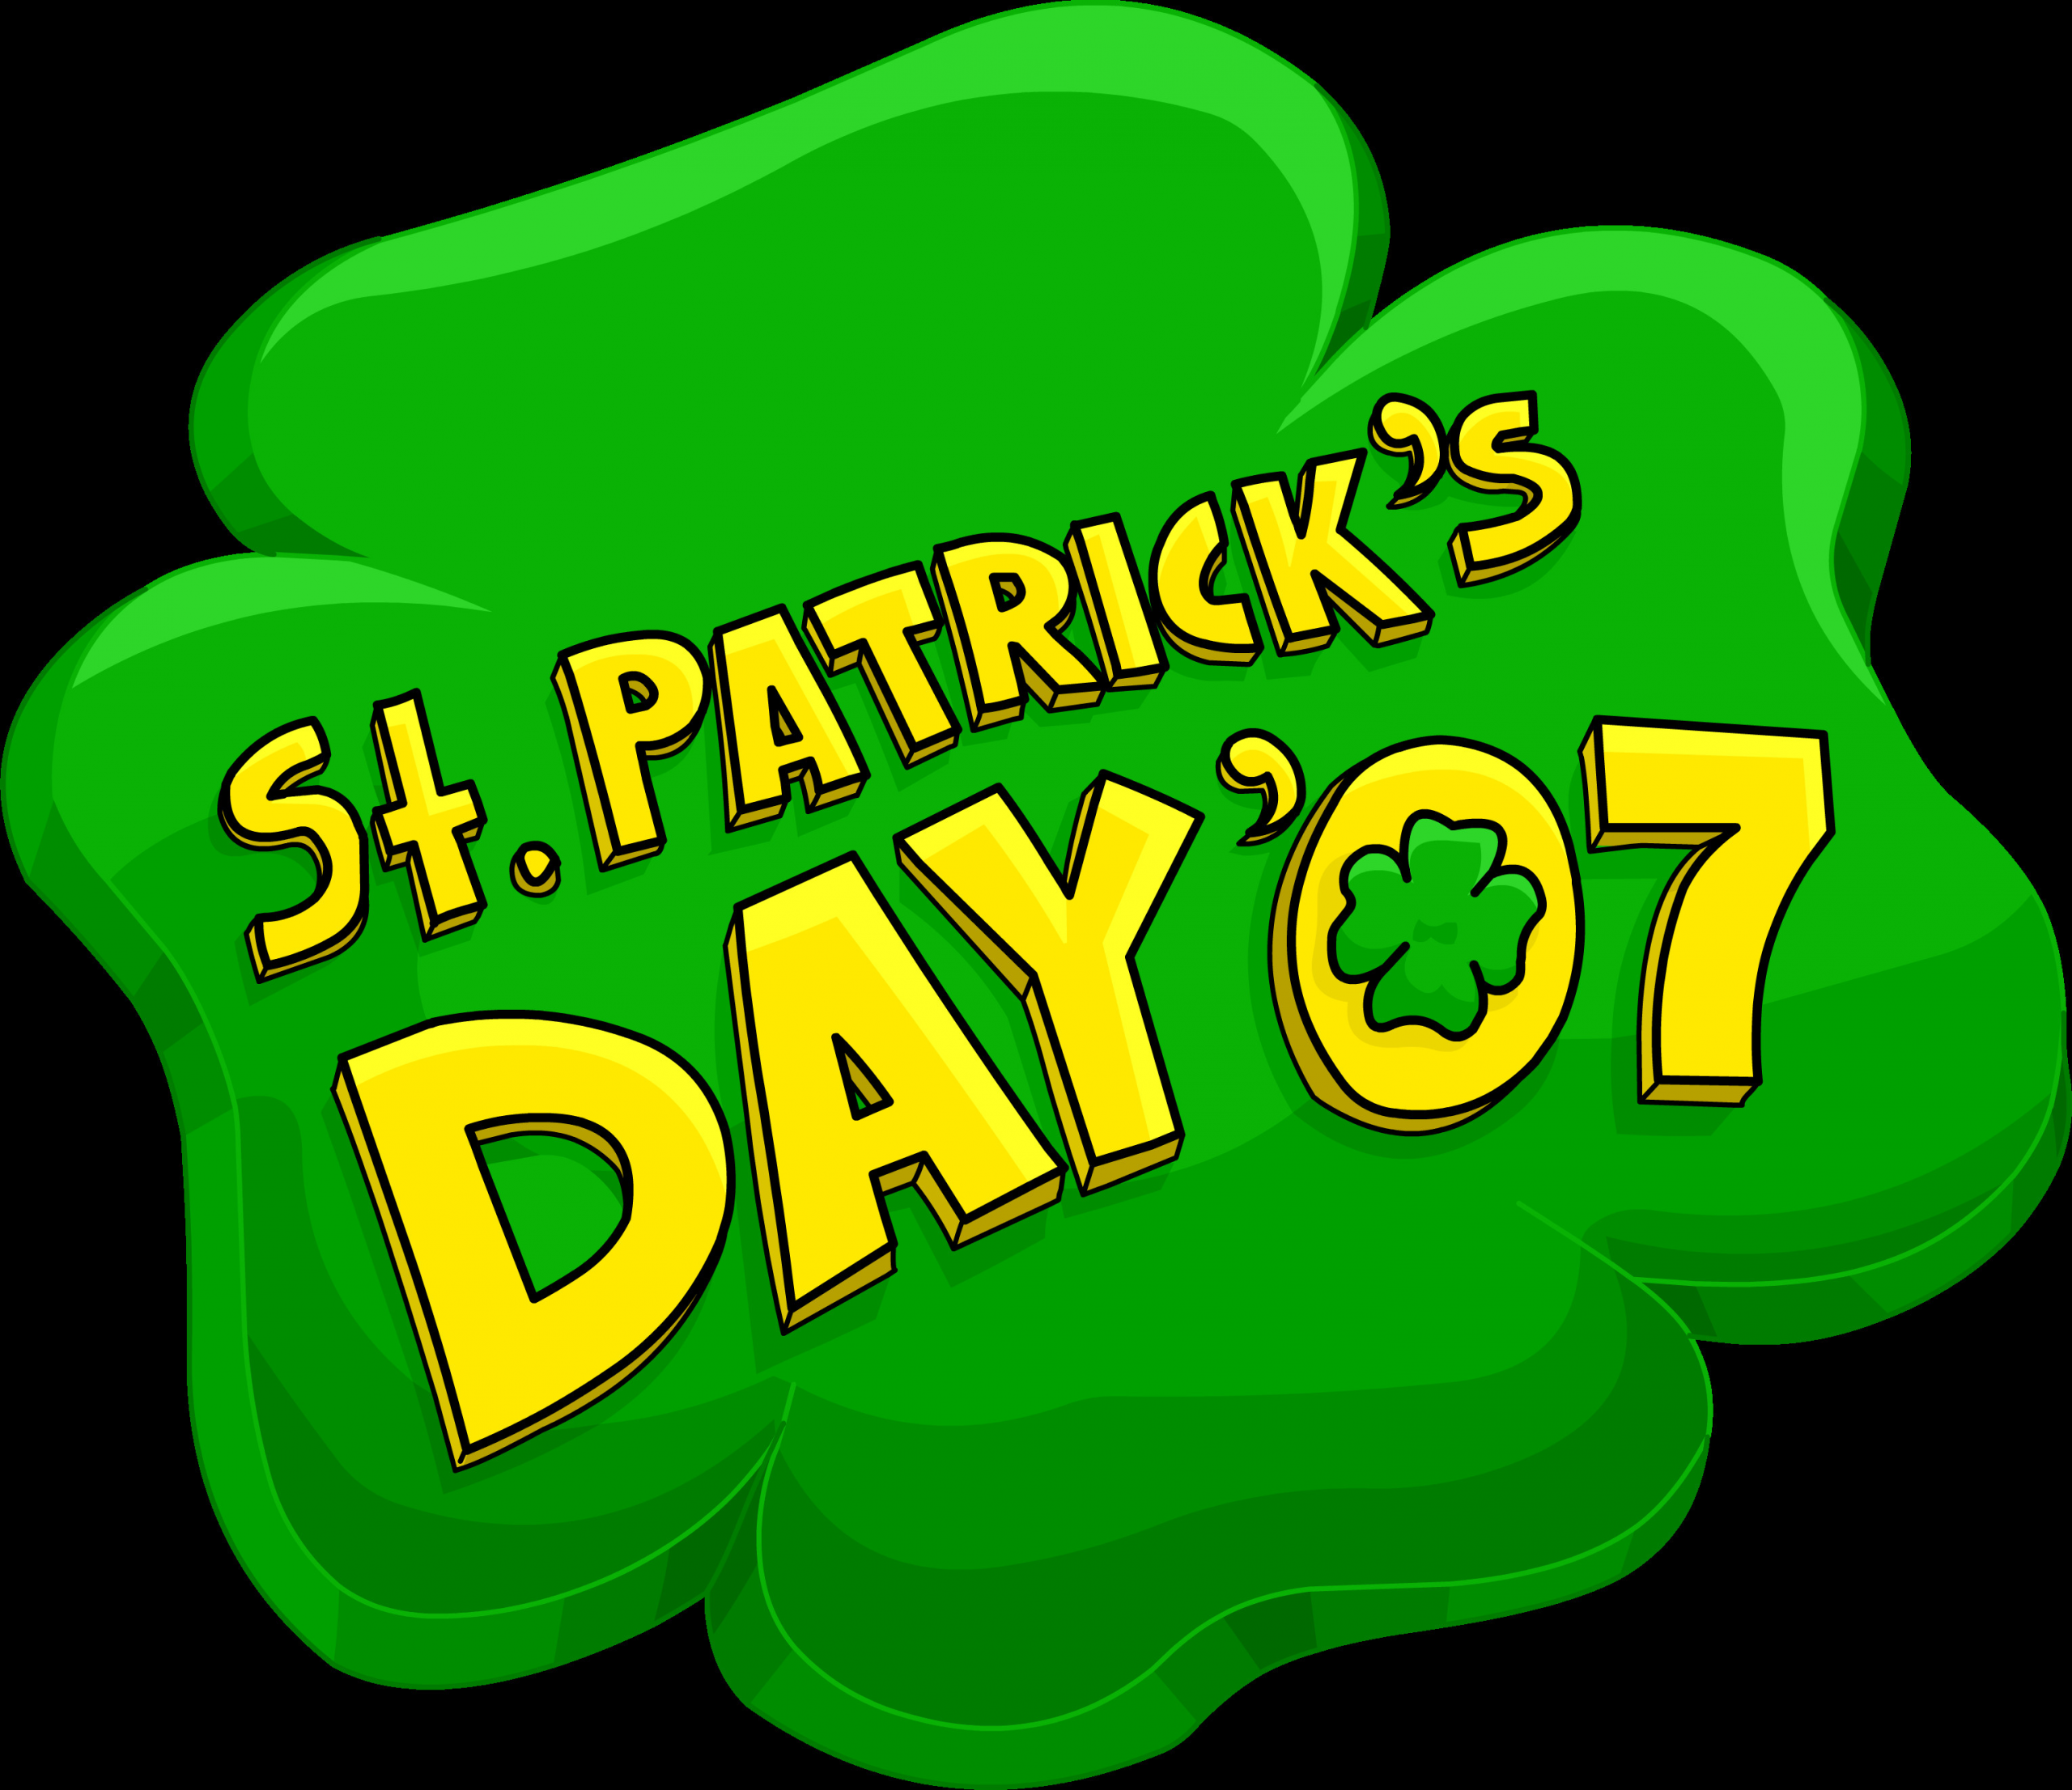 Saint Patrick's Day Party
 St Patrick s Day Party 2007 Club Penguin Wiki